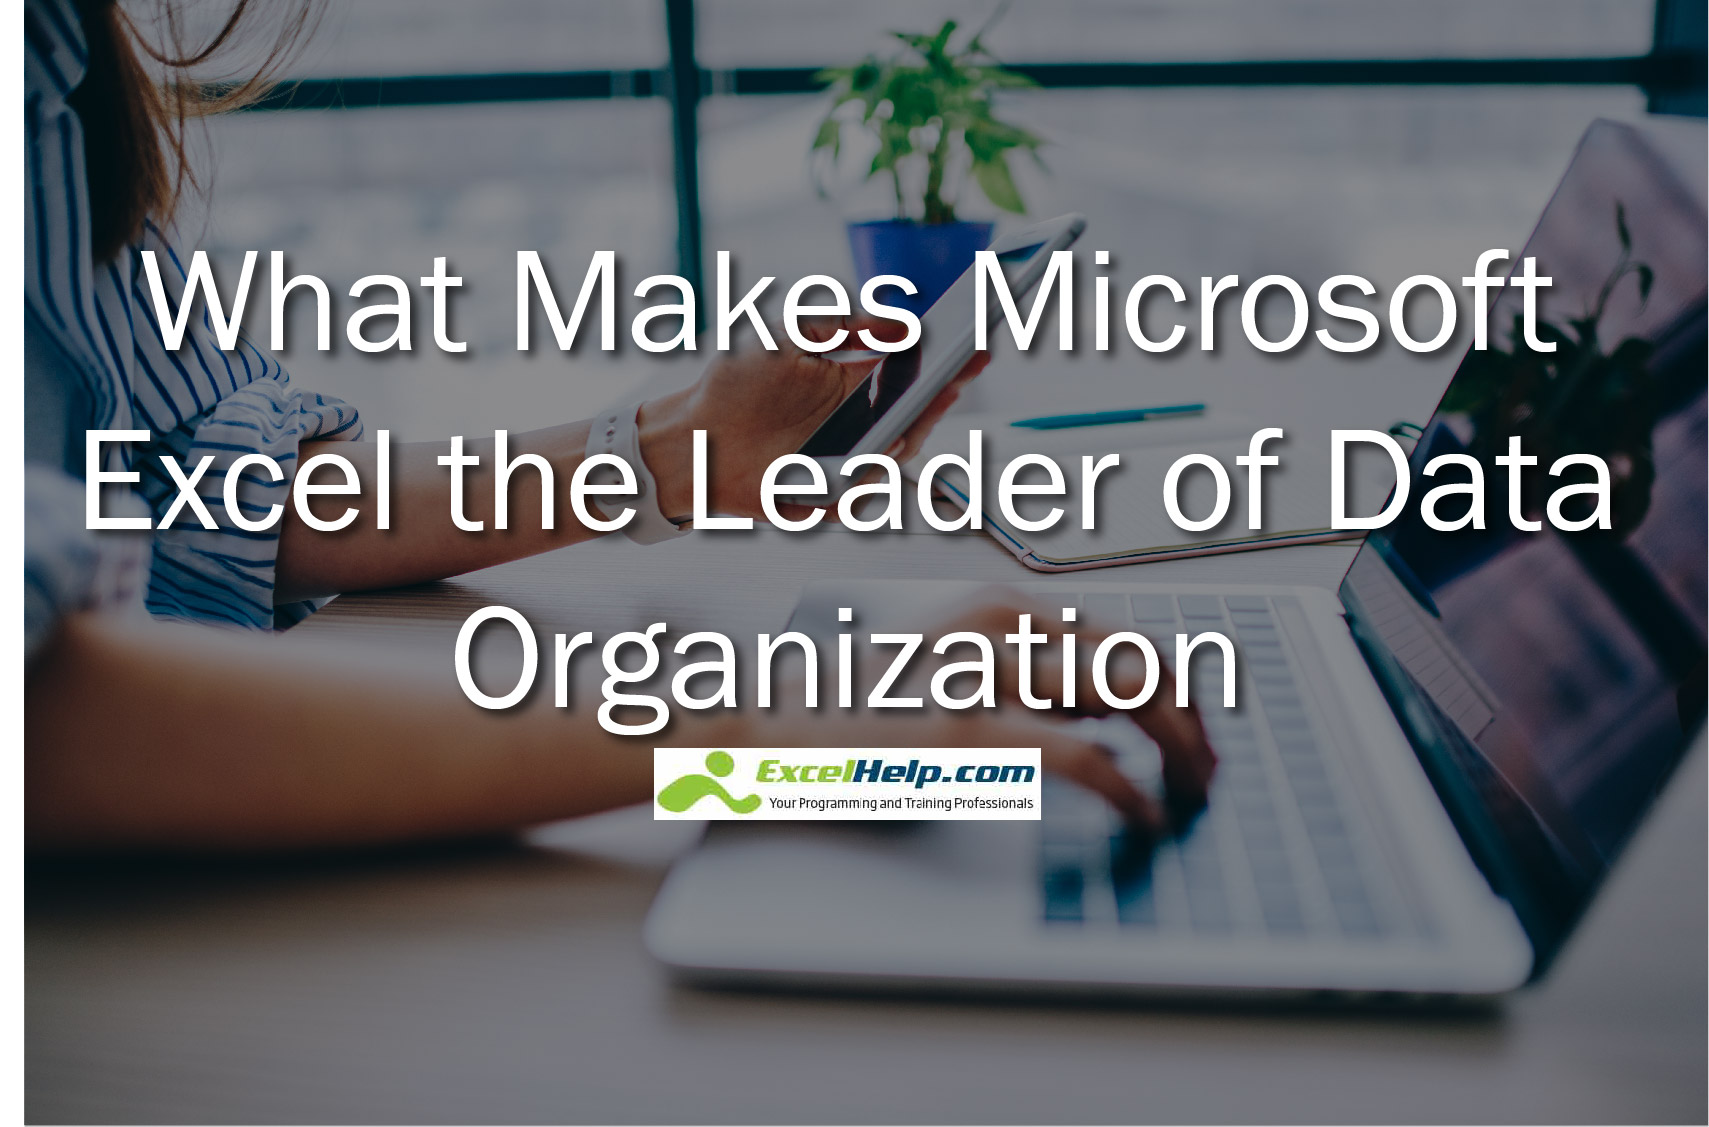 What Makes Microsoft Excel the Leader of Data Organization